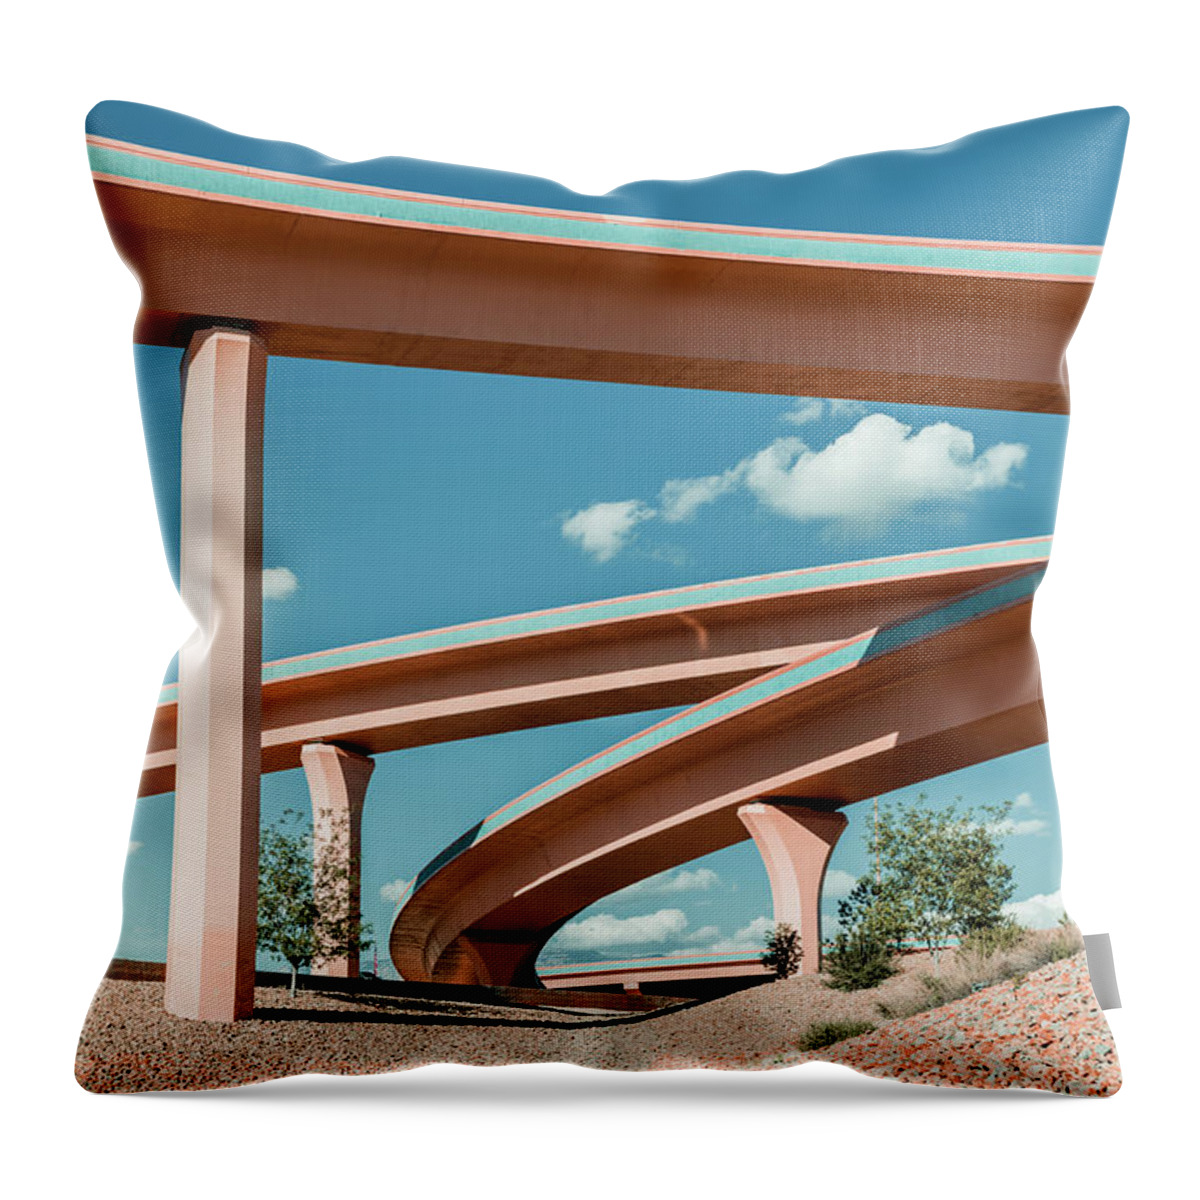 Autobahn Throw Pillow featuring the photograph New Mexico Albuquerque Interstate by Mlenny